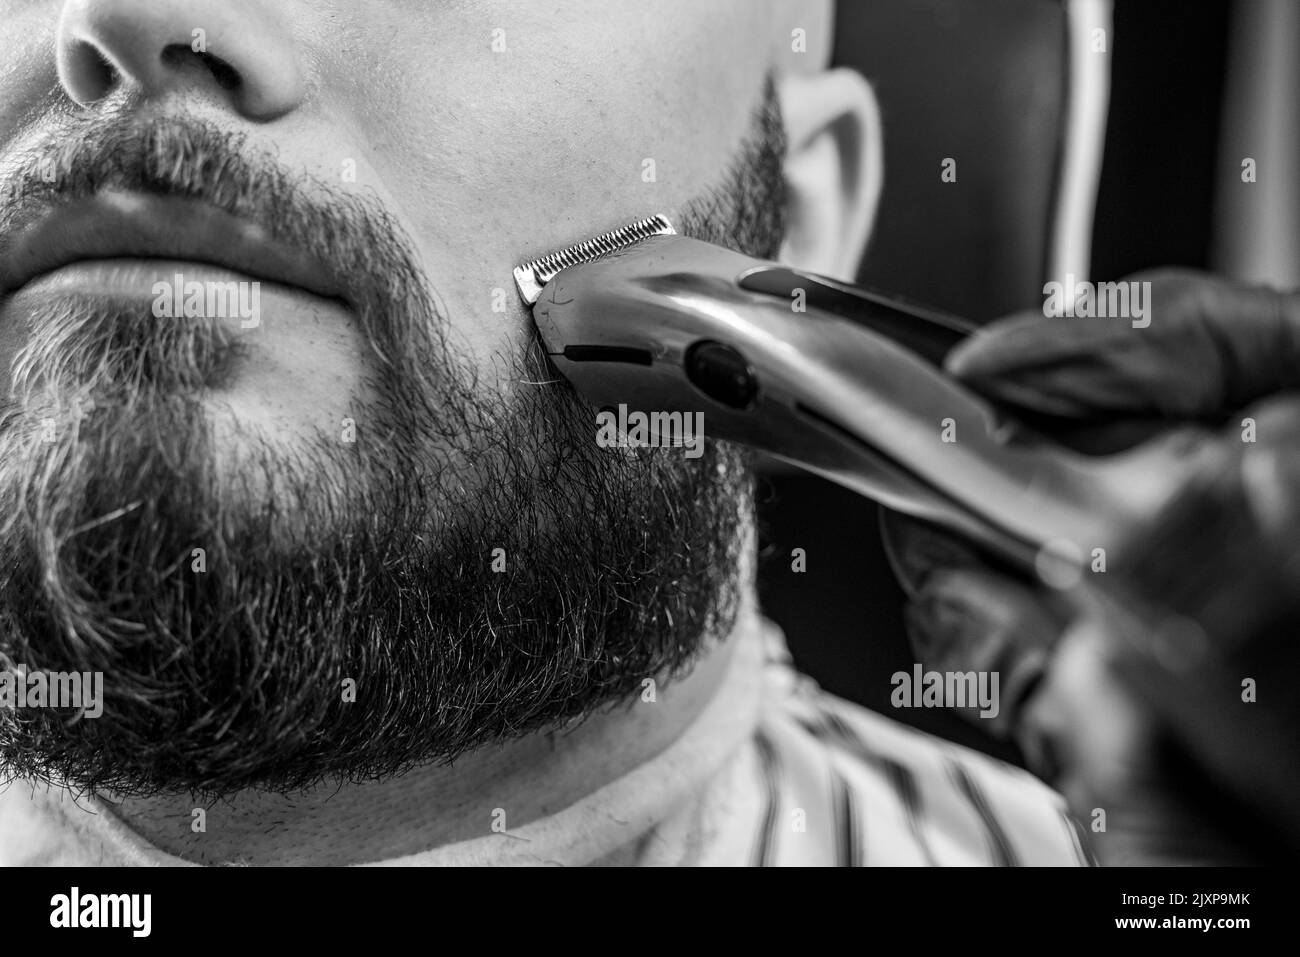 Man getting his beard trimmed with electric razor in barbershop. Black and white image. Stock Photo